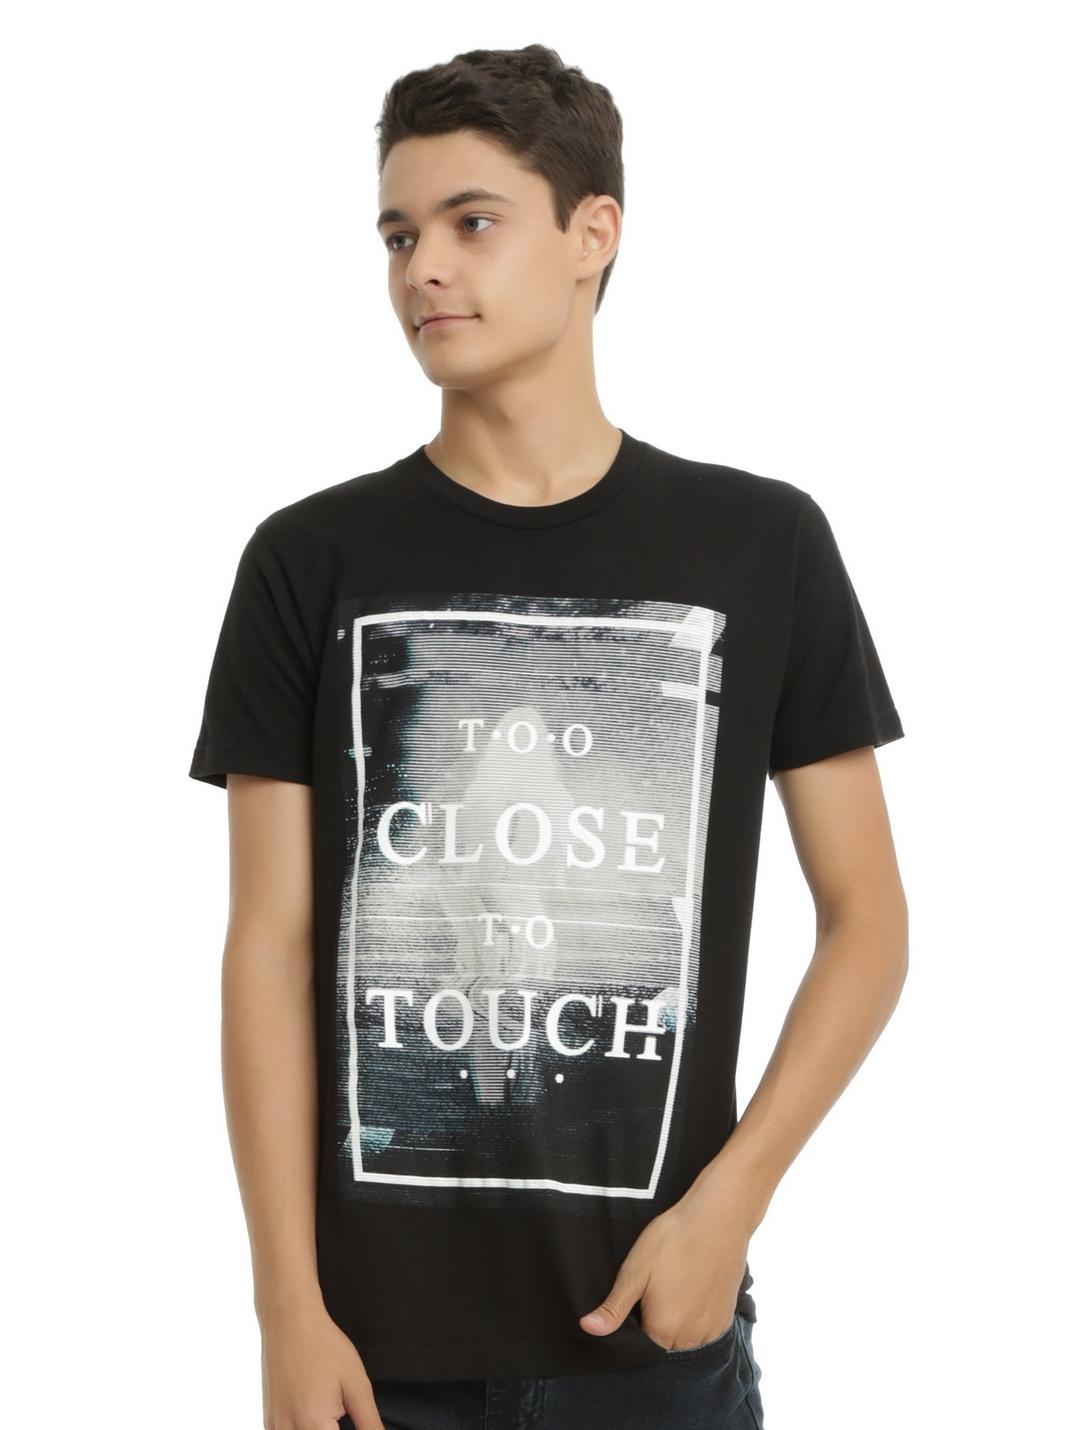 Too Close To Touch EP Cover T-Shirt, BLACK, hi-res